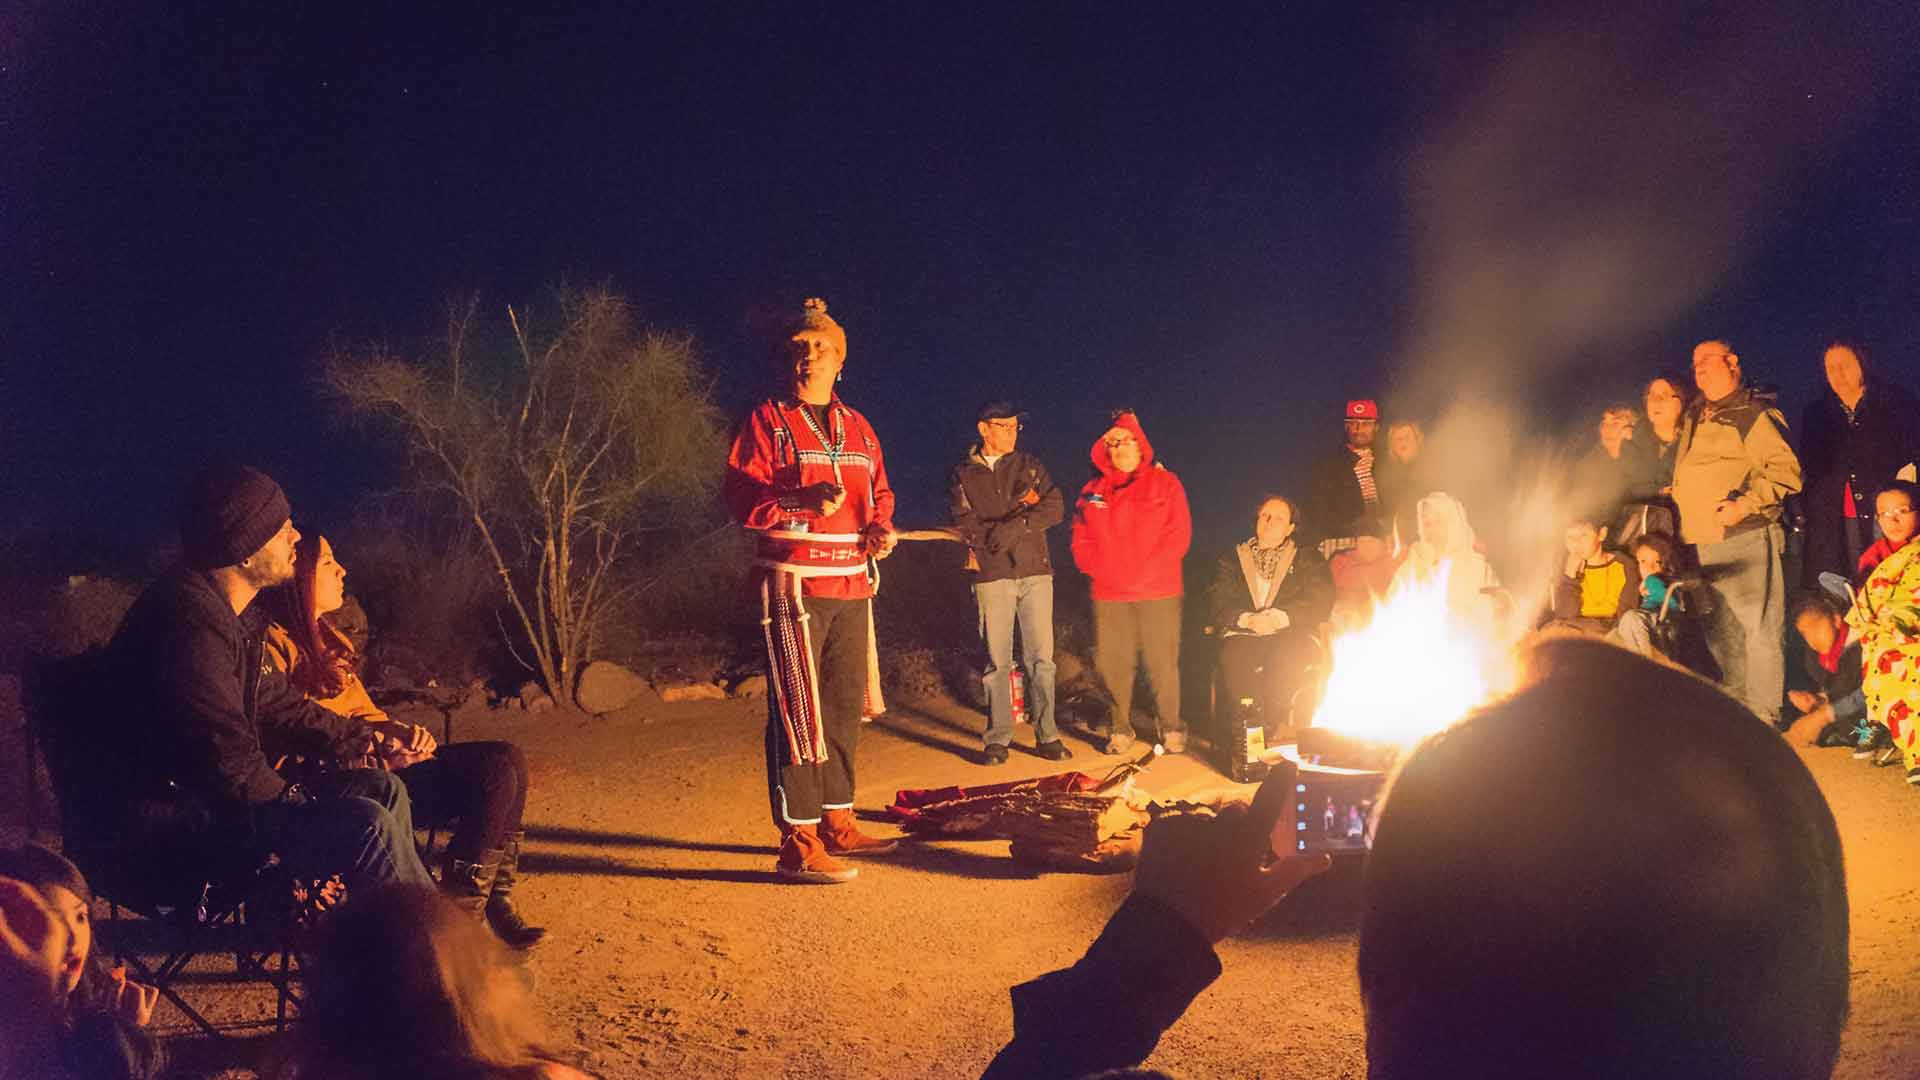 Alex Mares stands at a bright glowing campfire surrounded by people listening